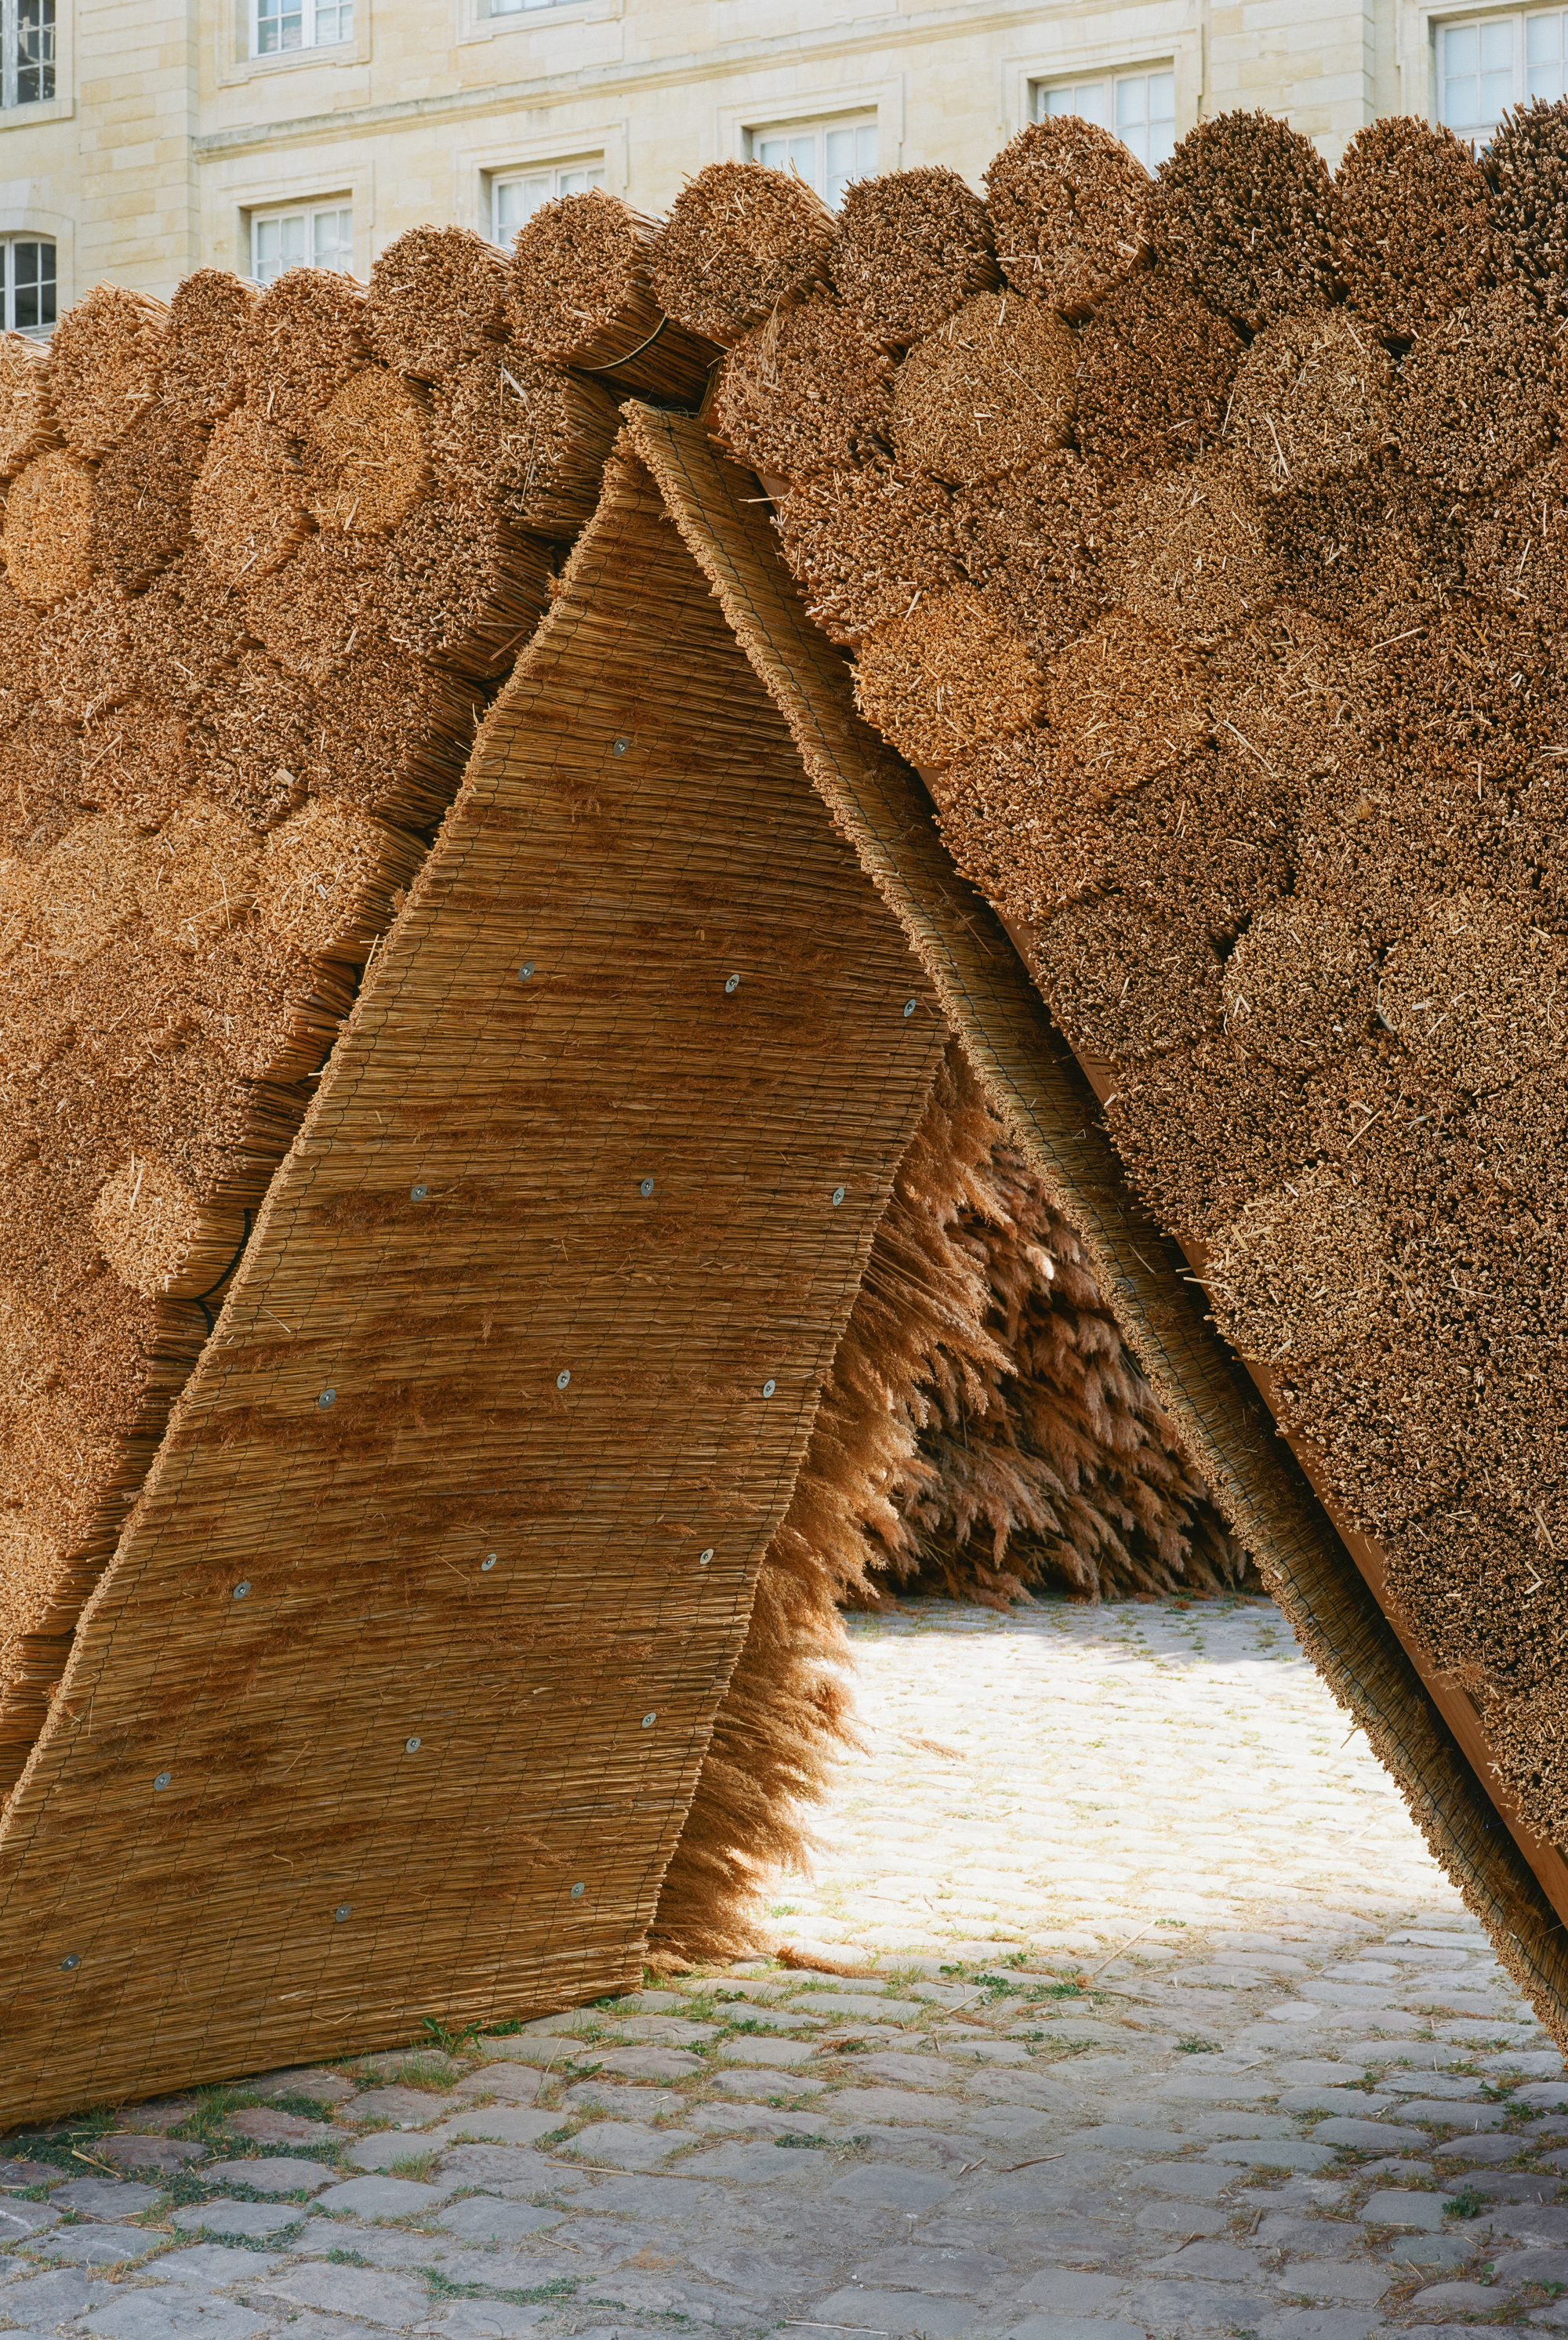 Details of reeds from the Rausa pavilion